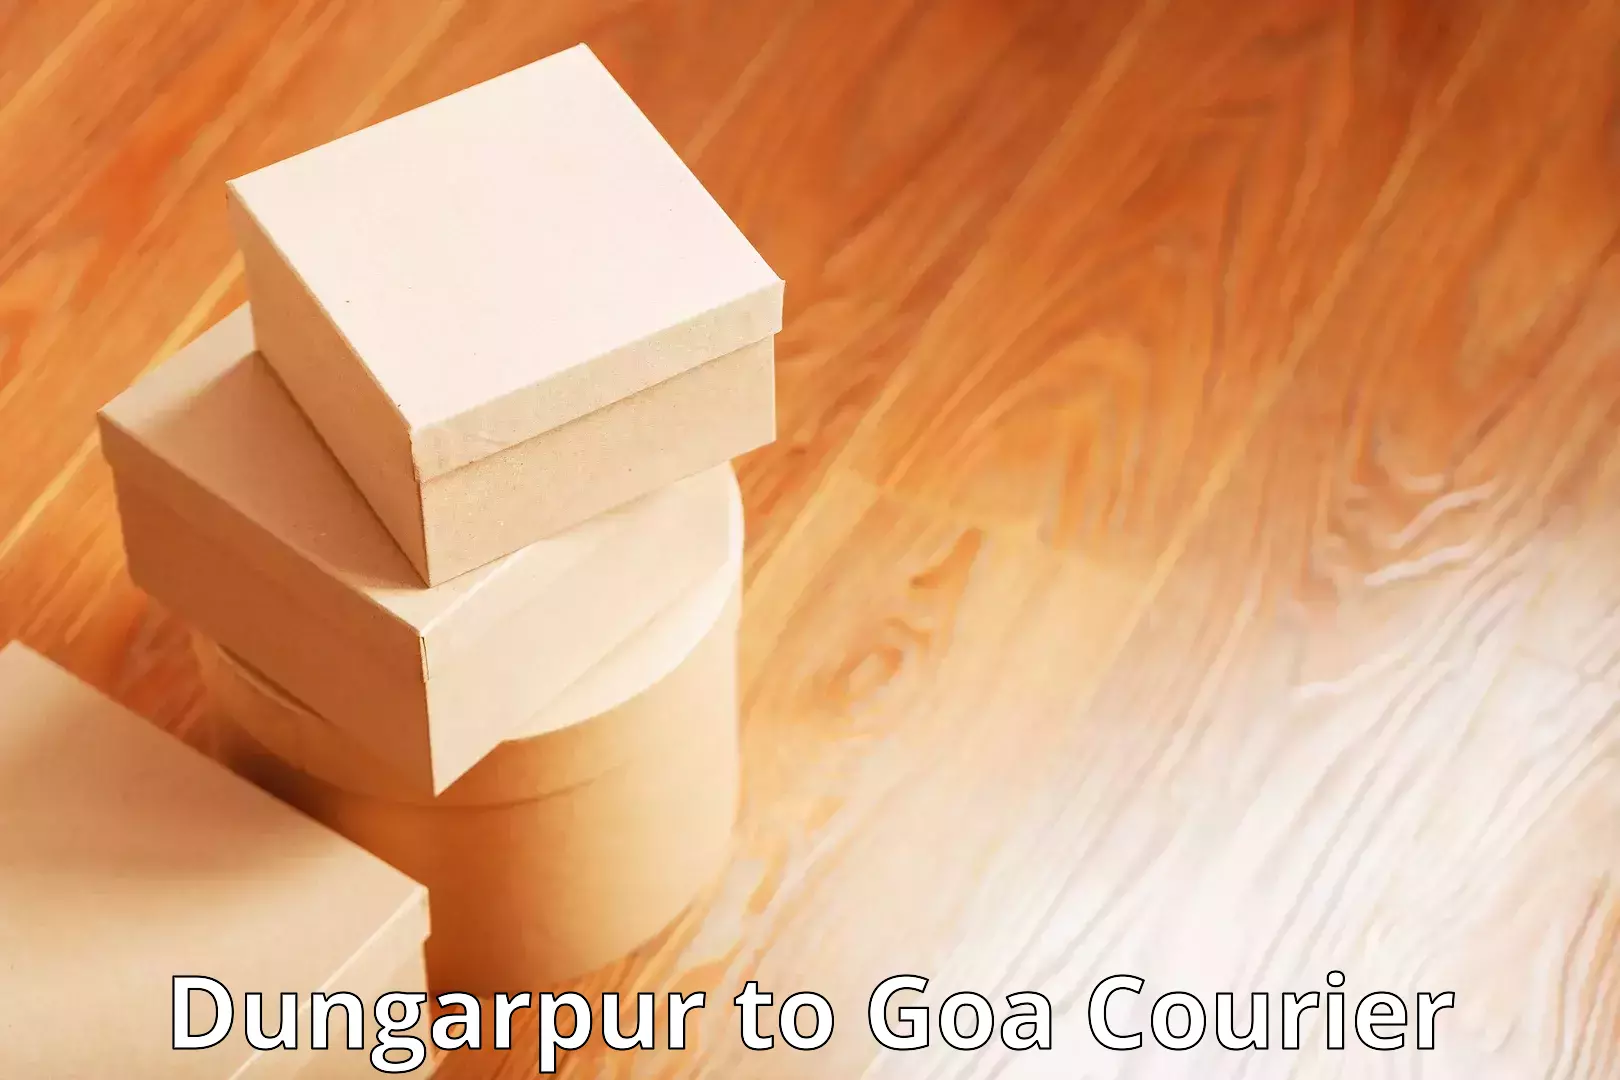 Cash on delivery service Dungarpur to Goa